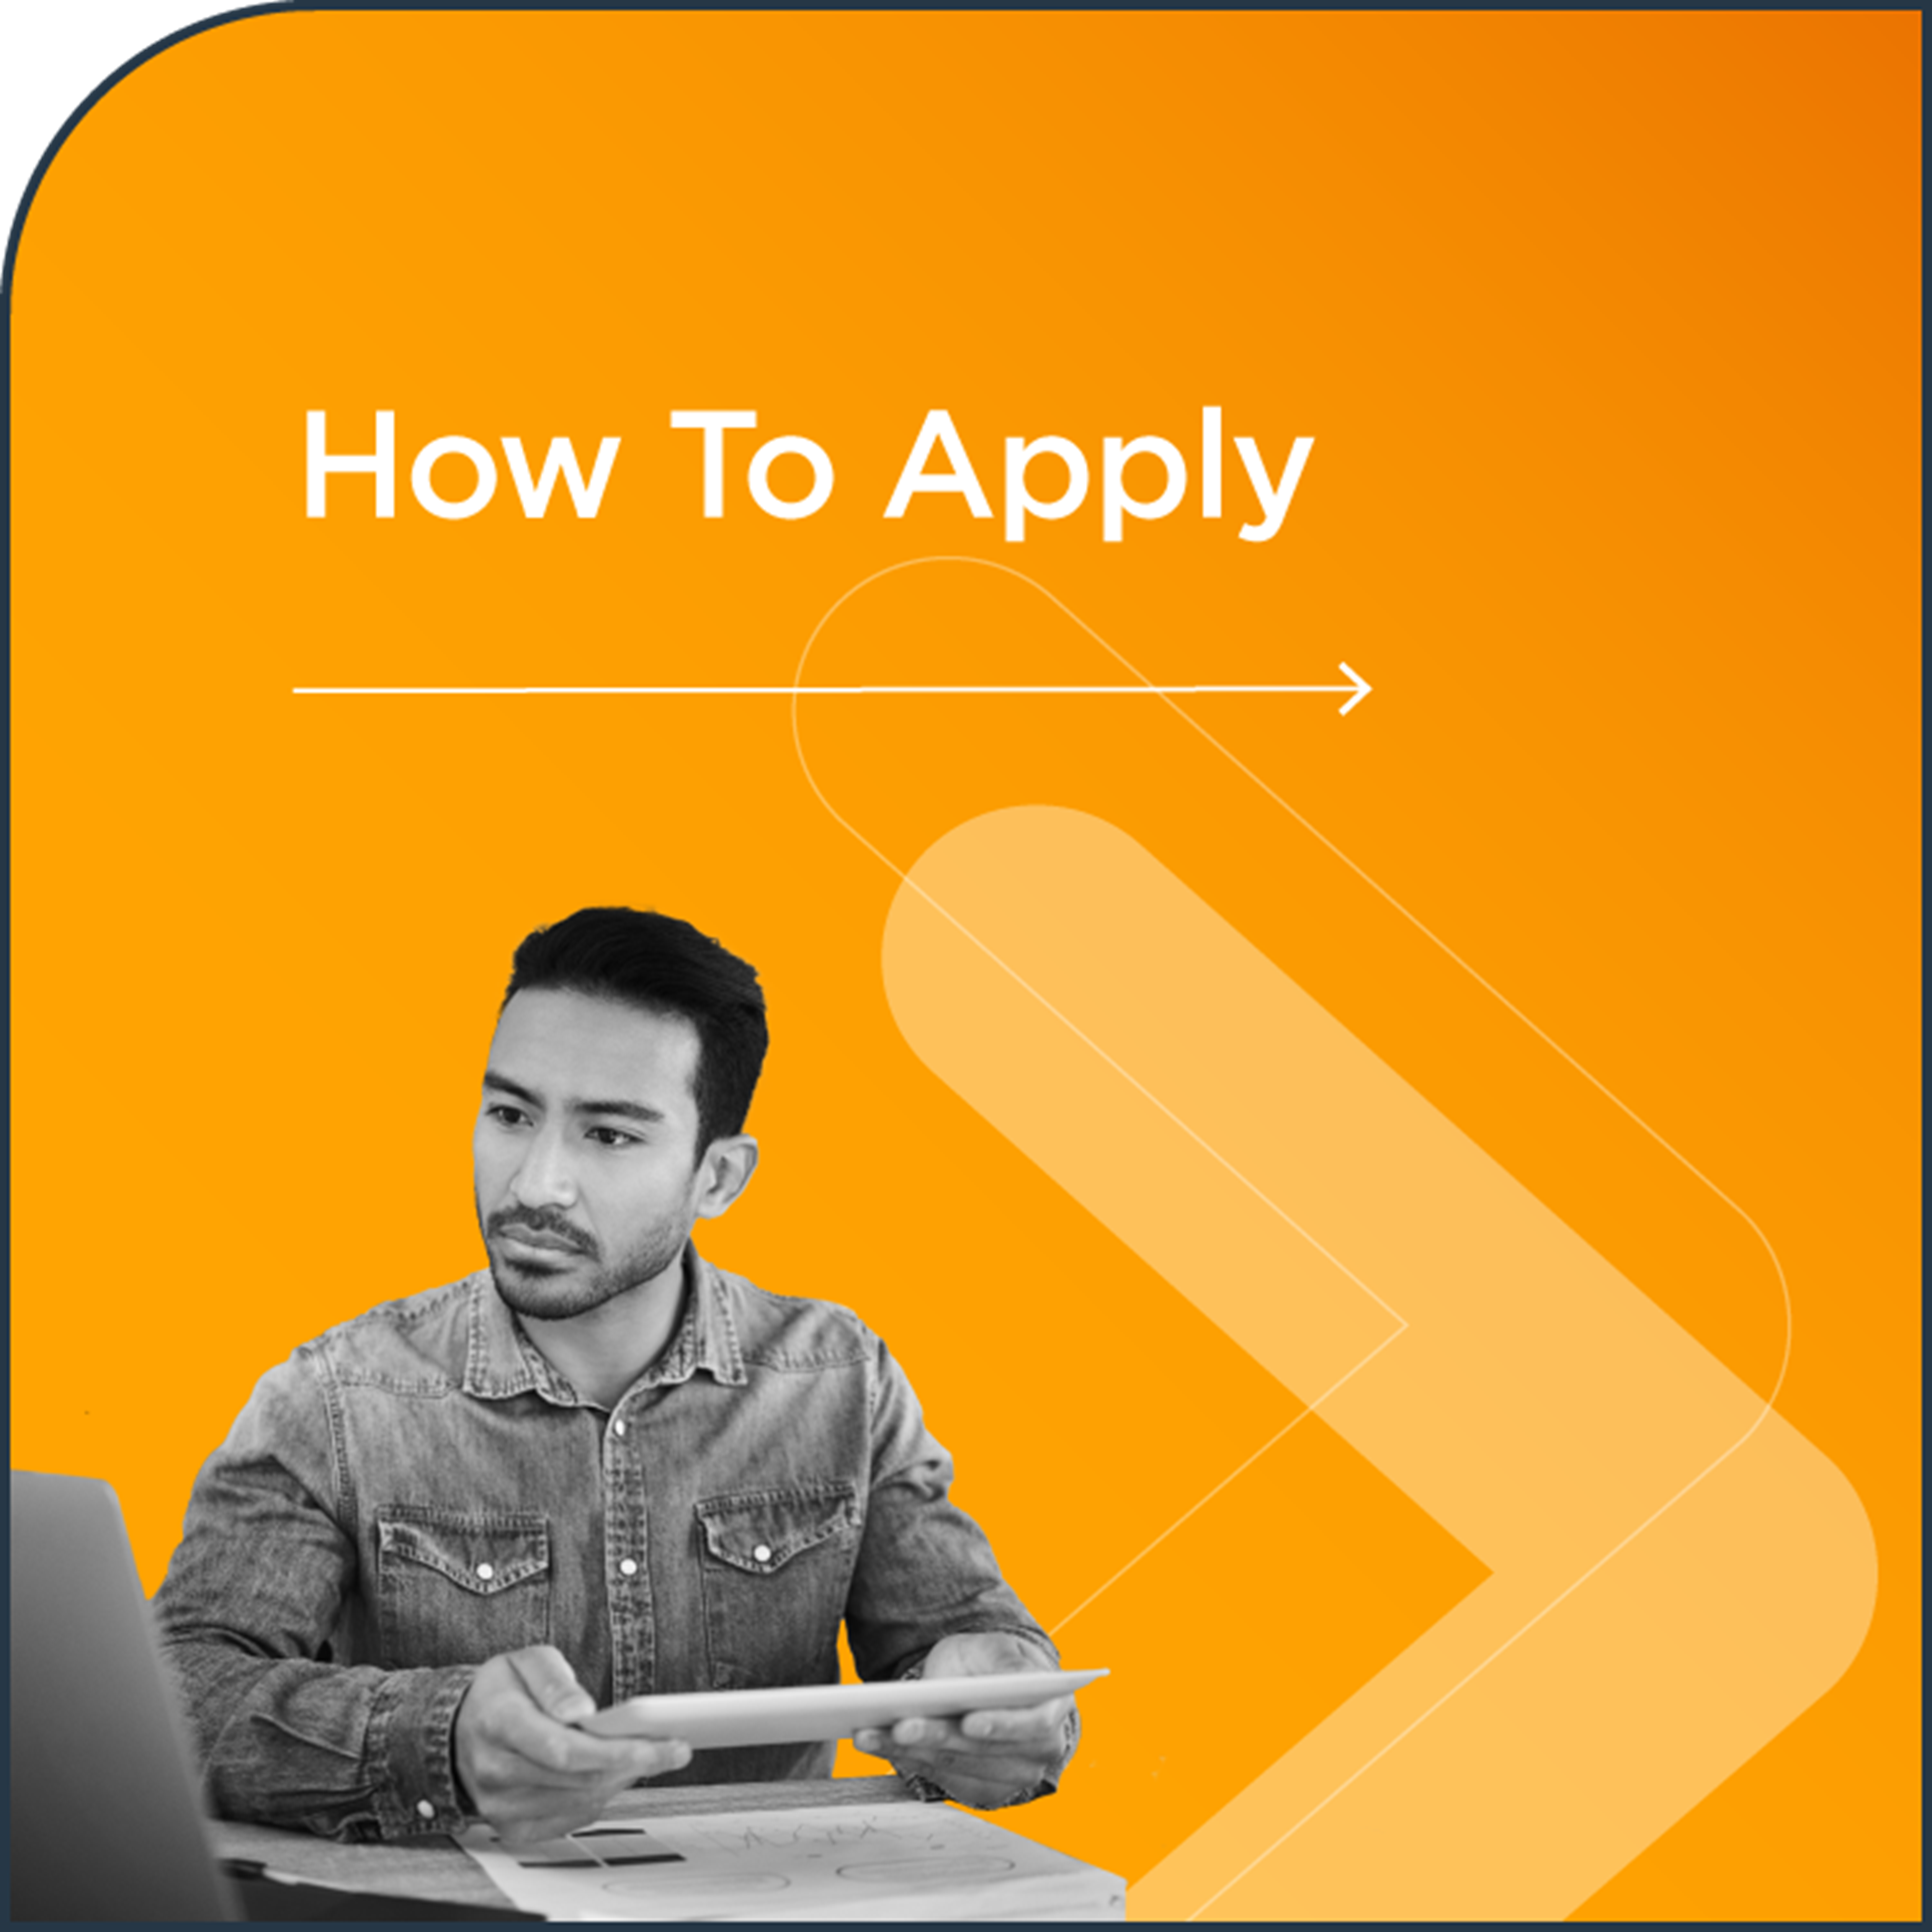 How To Apply